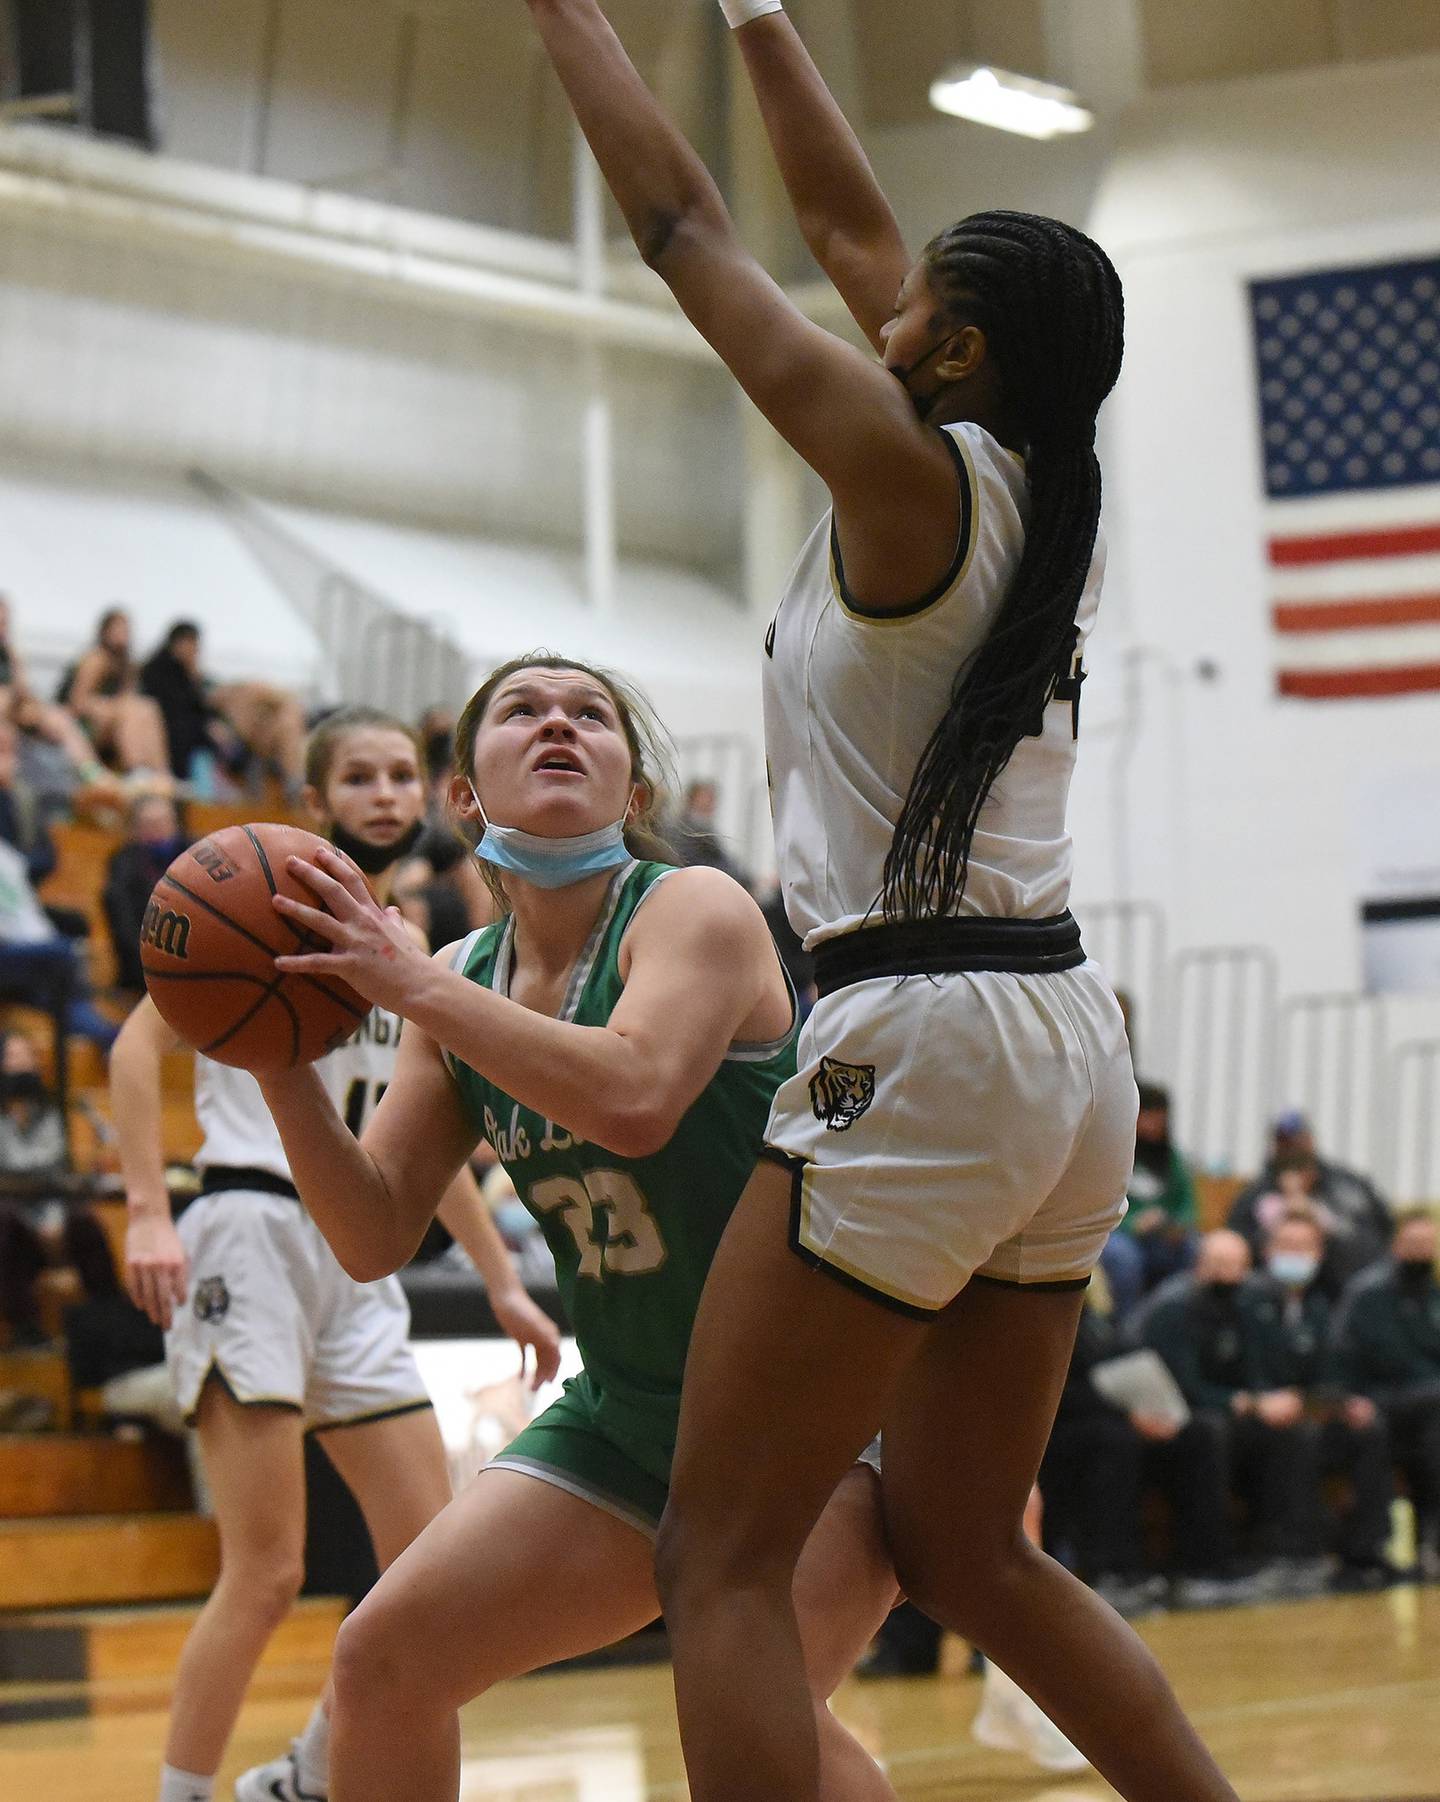 Oak Lawn's Mia Kennelly (23) tries to get off a shot against Oak Forest's Janae Kent (34) during a game on Monday, Feb. 7, 2022.